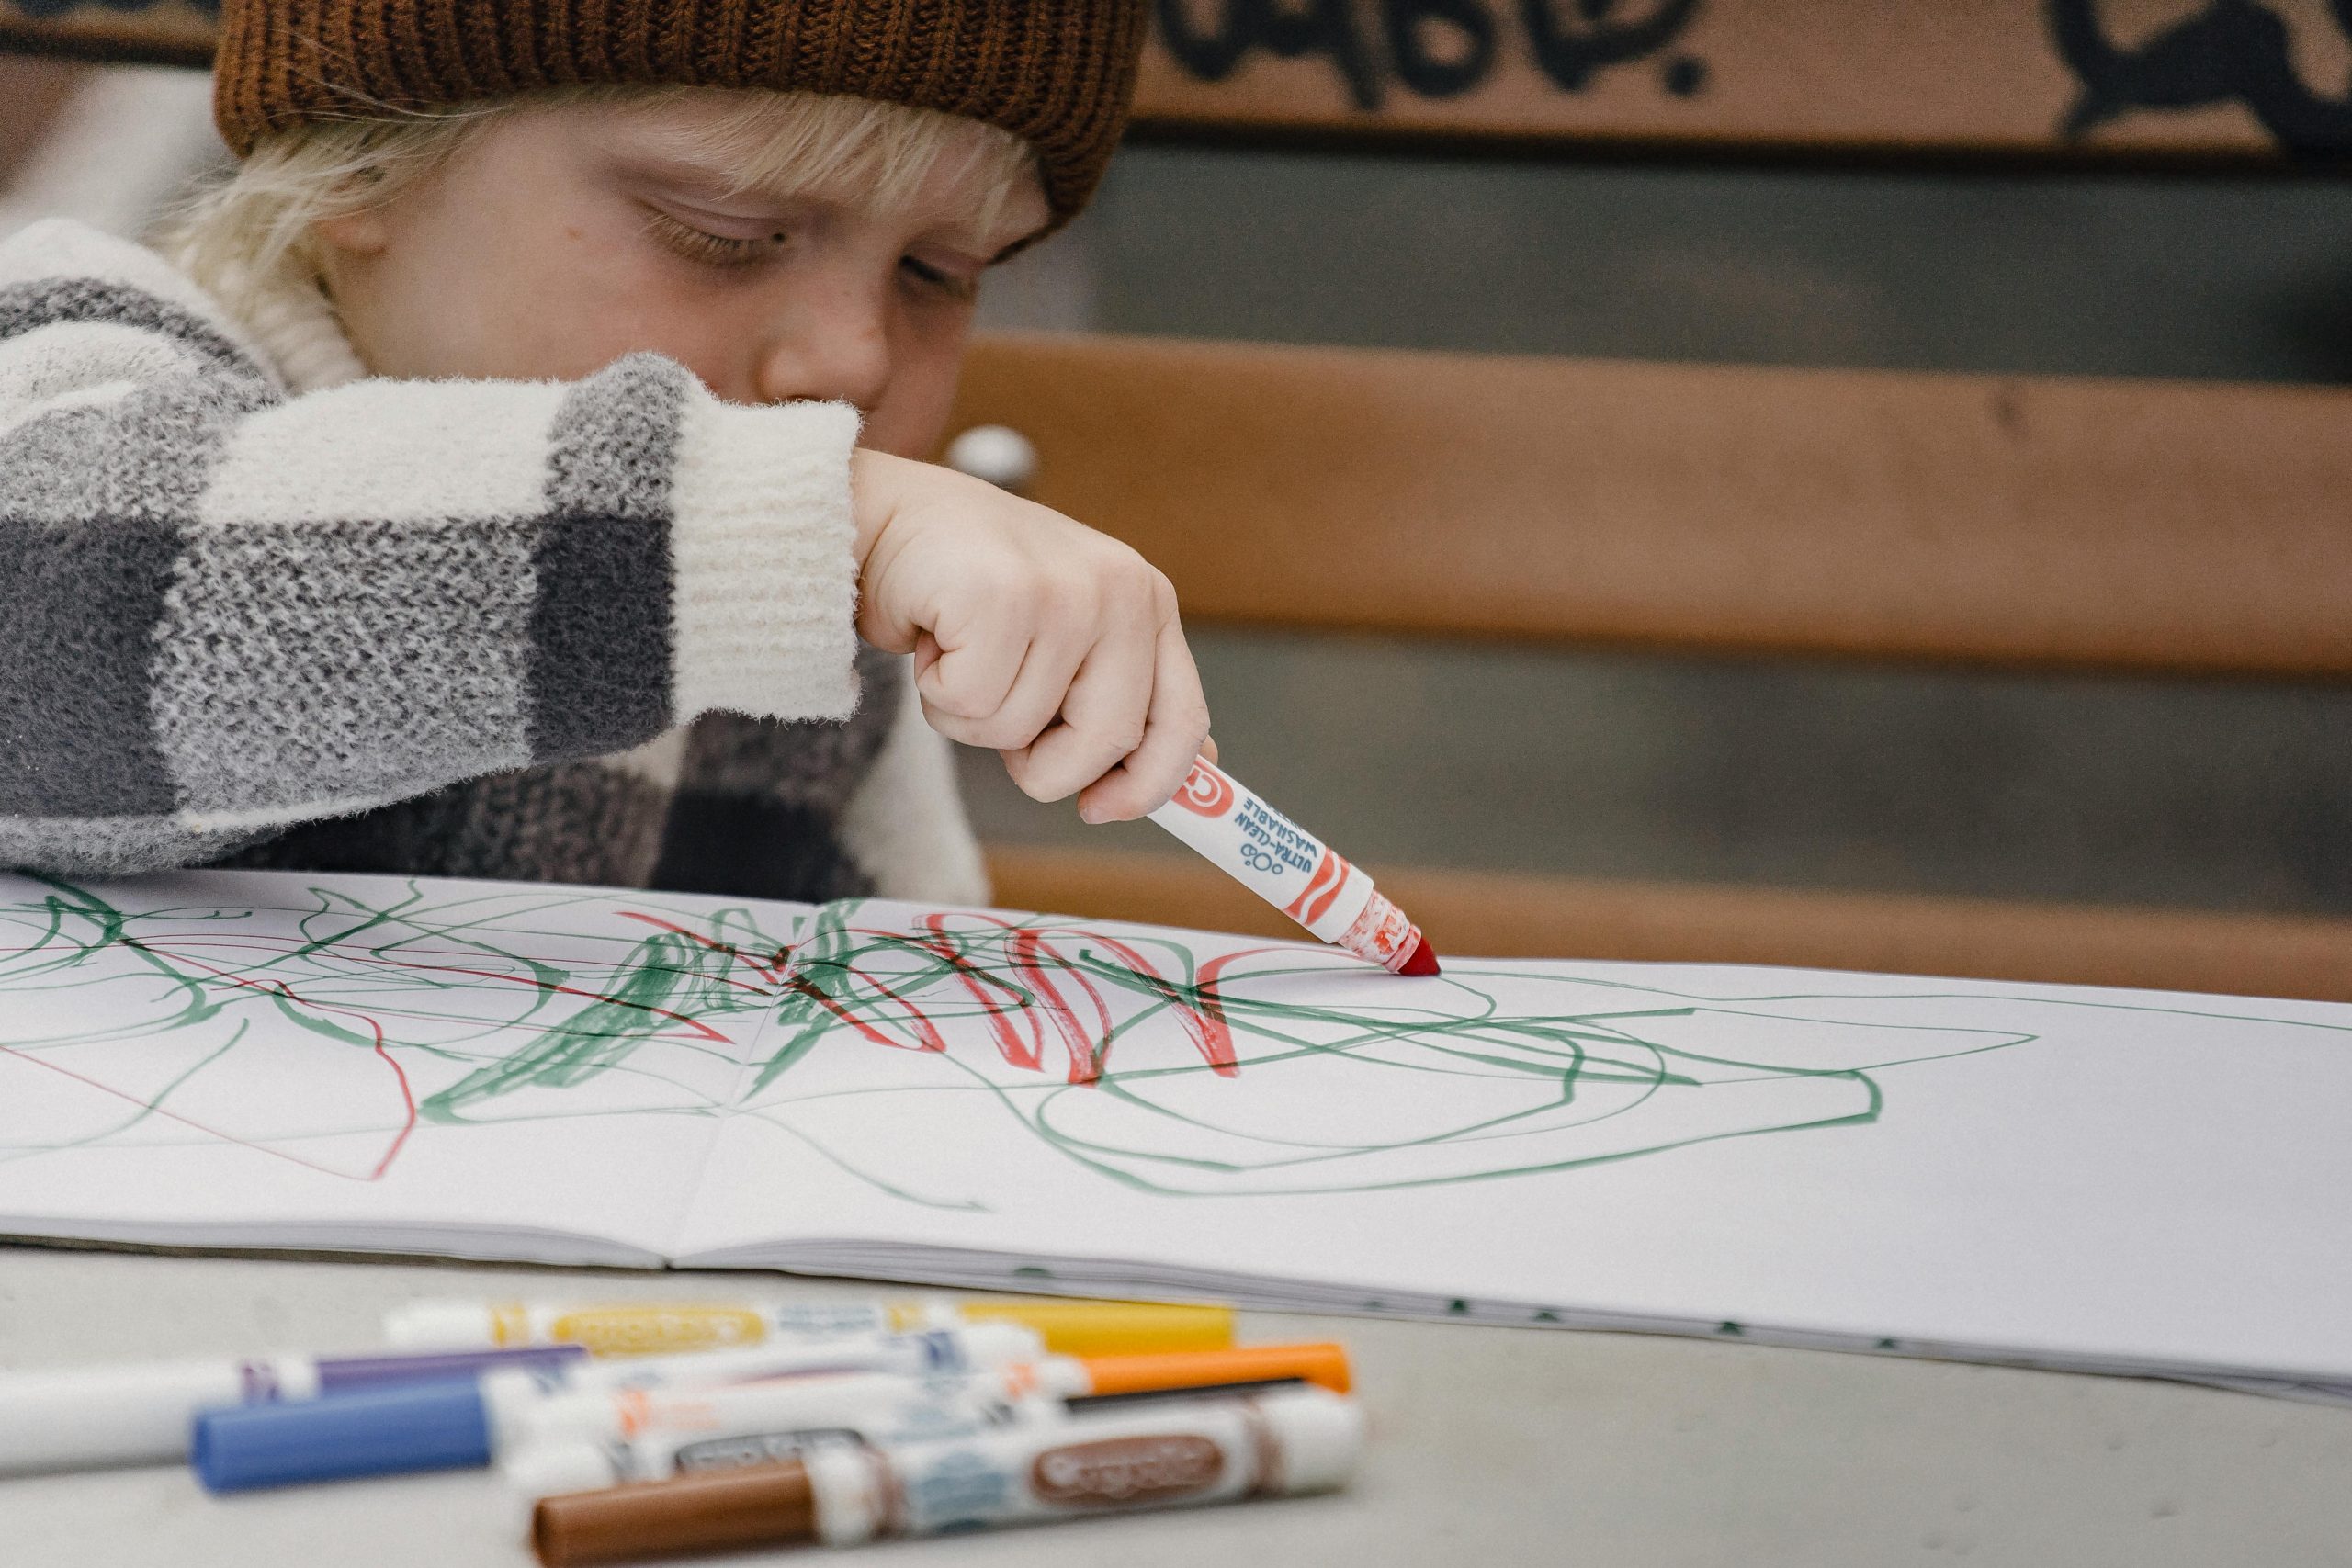 An Overview of Developing Children's Creative Talent